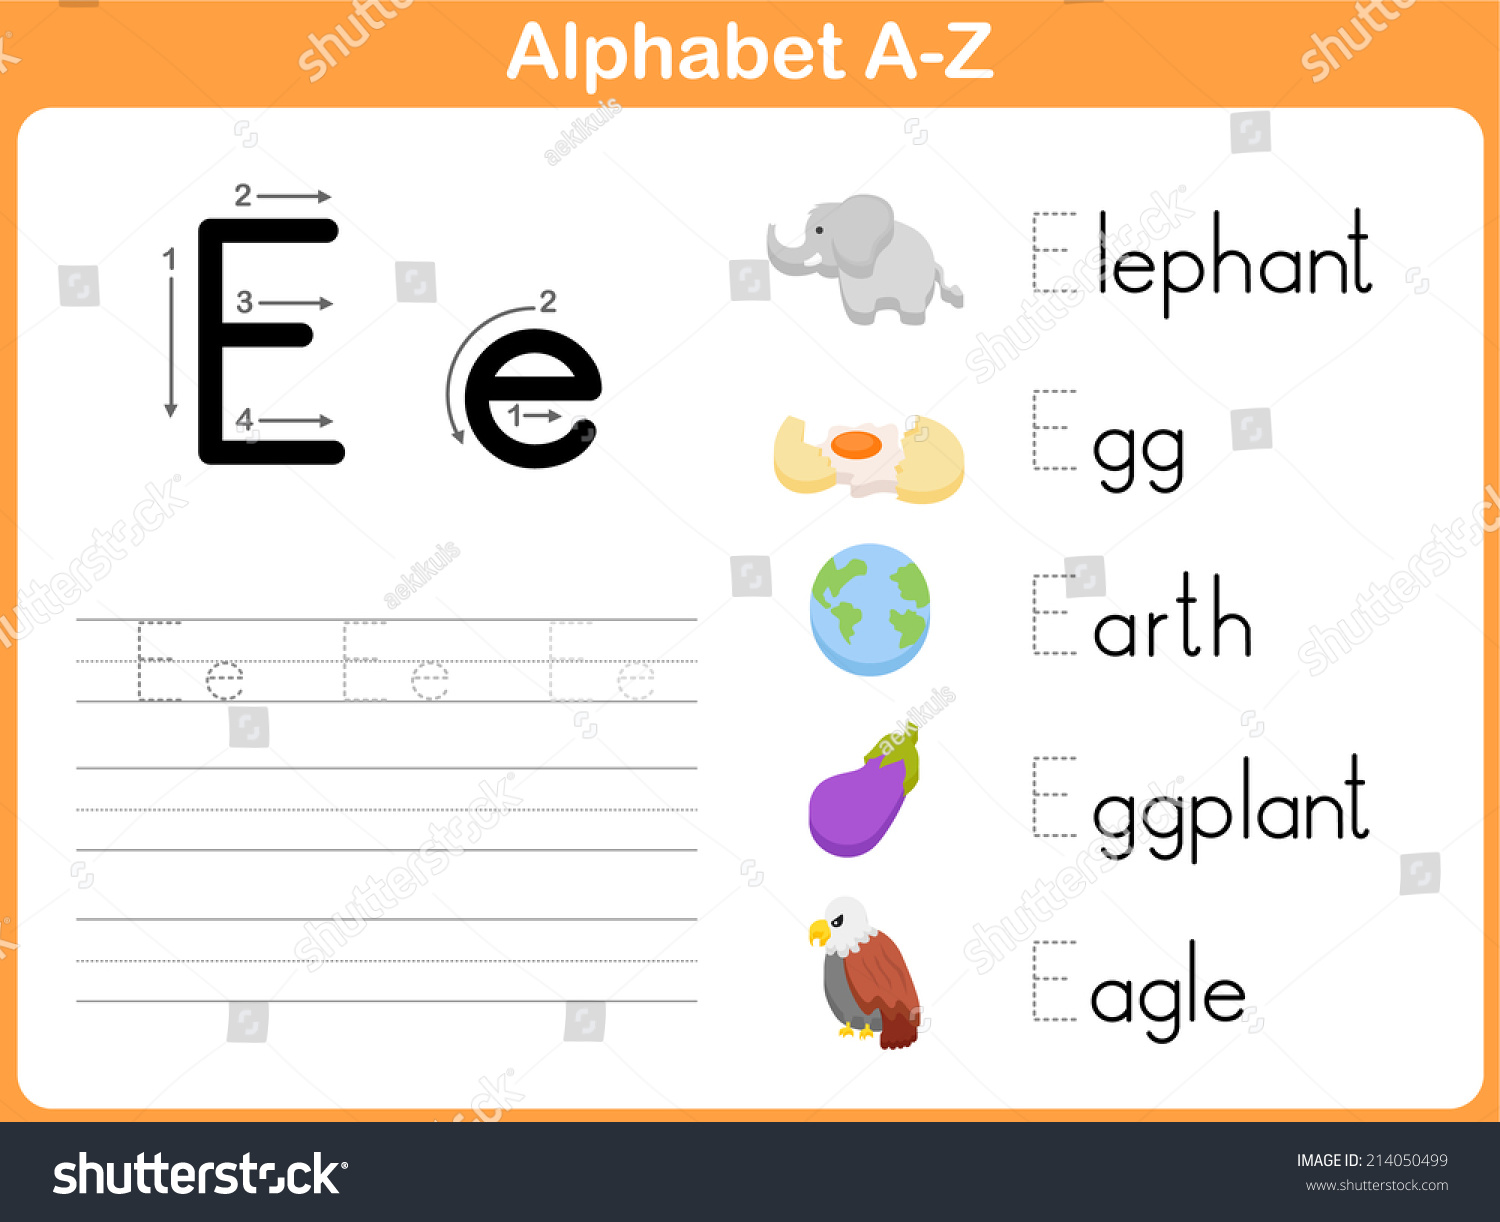 Alphabet Tracing Worksheet Writing Az Stock Vector 214050499  worksheets for teachers, printable worksheets, multiplication, free worksheets, and math worksheets Tracing Letters A Z Worksheet 1222 x 1500